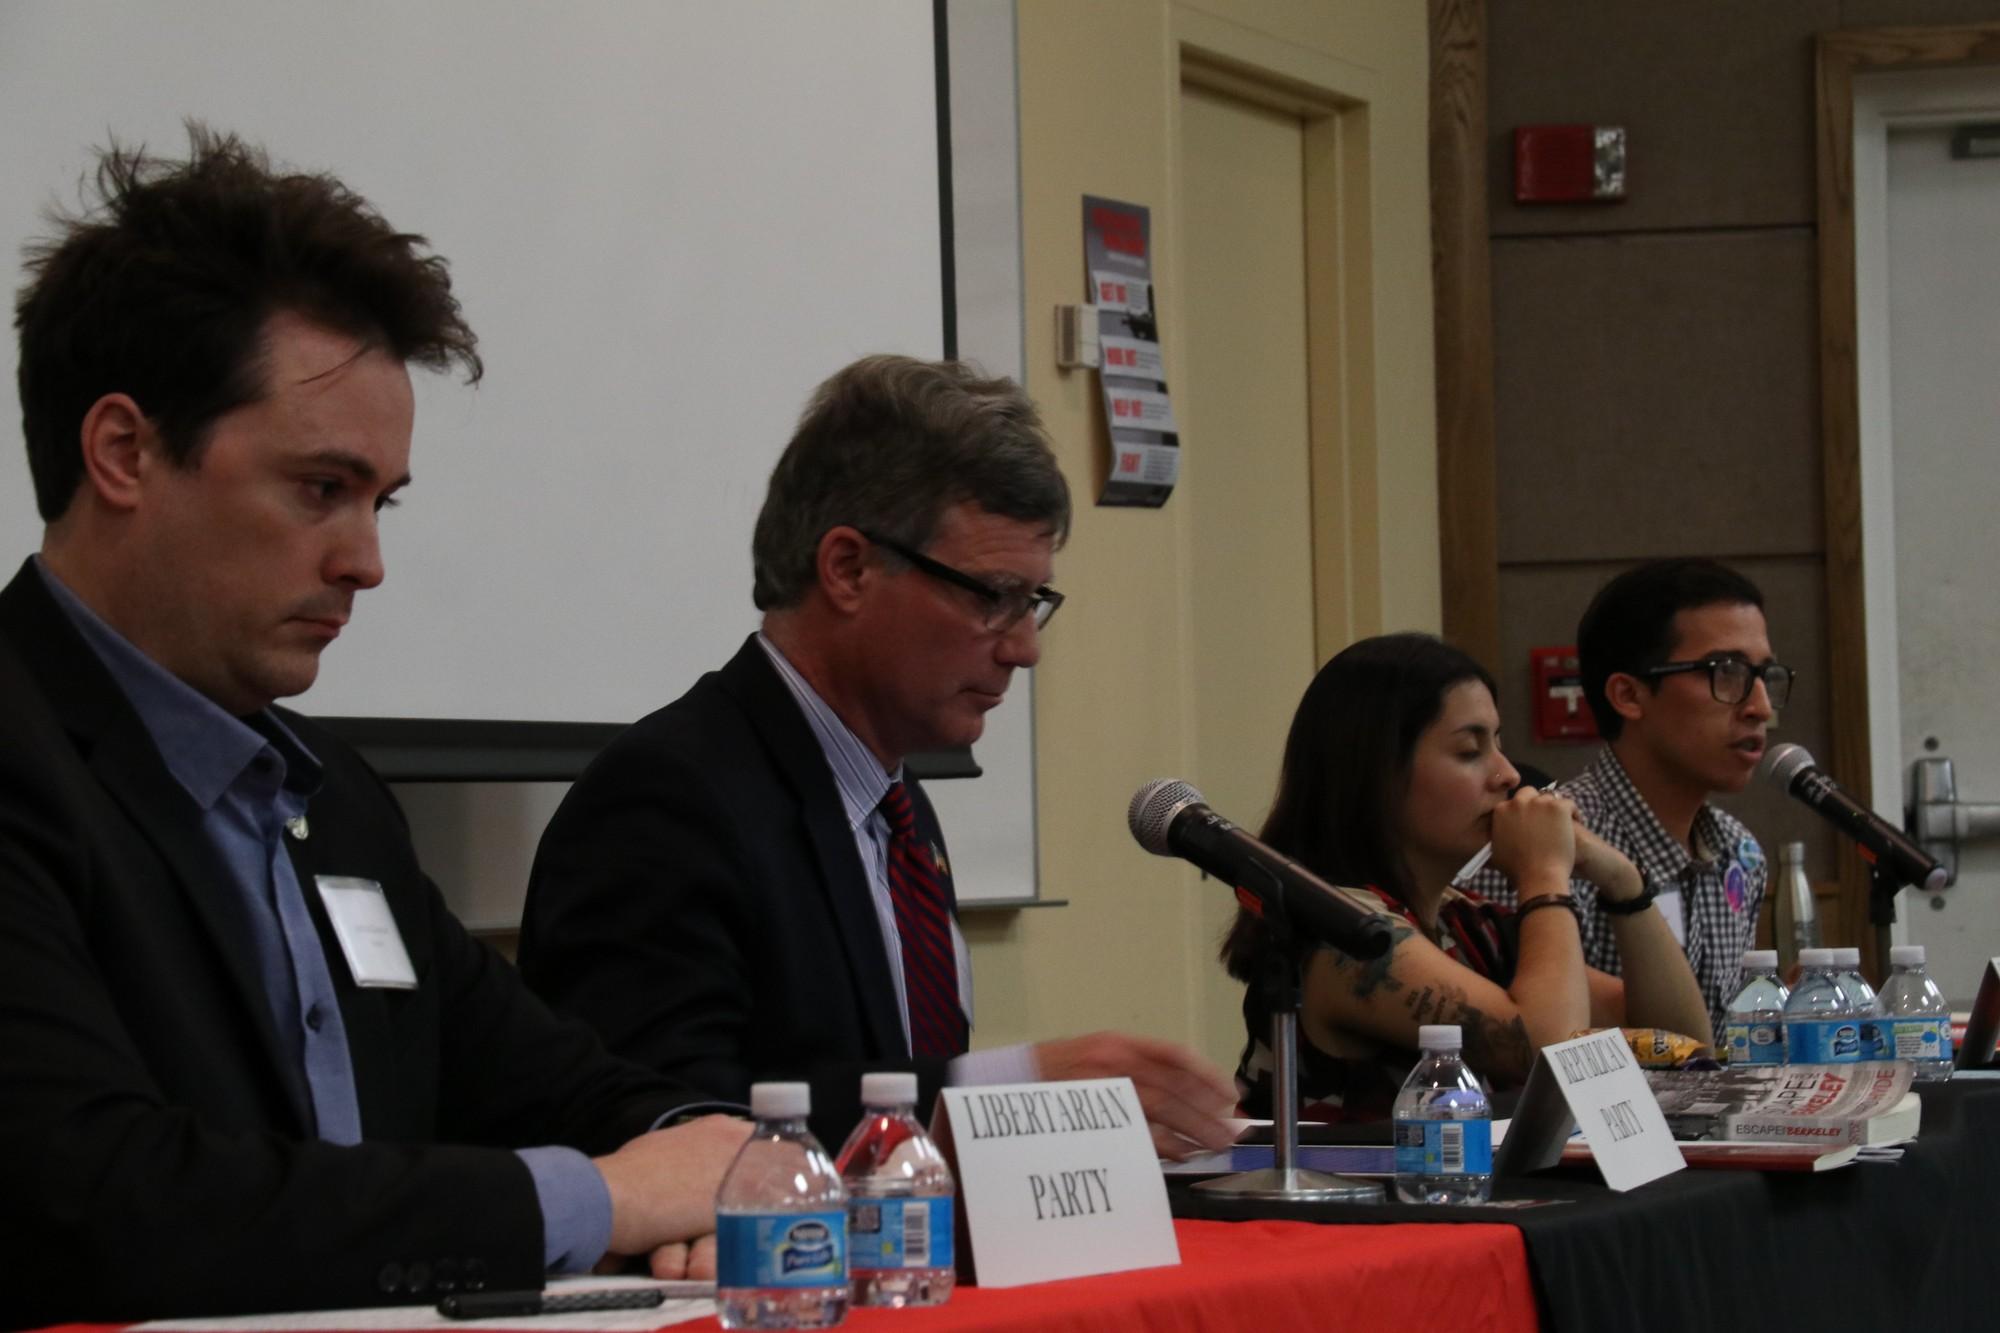 (From left to right)Joshua Glawson, Howard Hyde, Xochitl Medrano and Angel Rolland debate on their parties stances and policies. Each represented a particular party, Libertarian, republican, Democrat and green parties respectively.